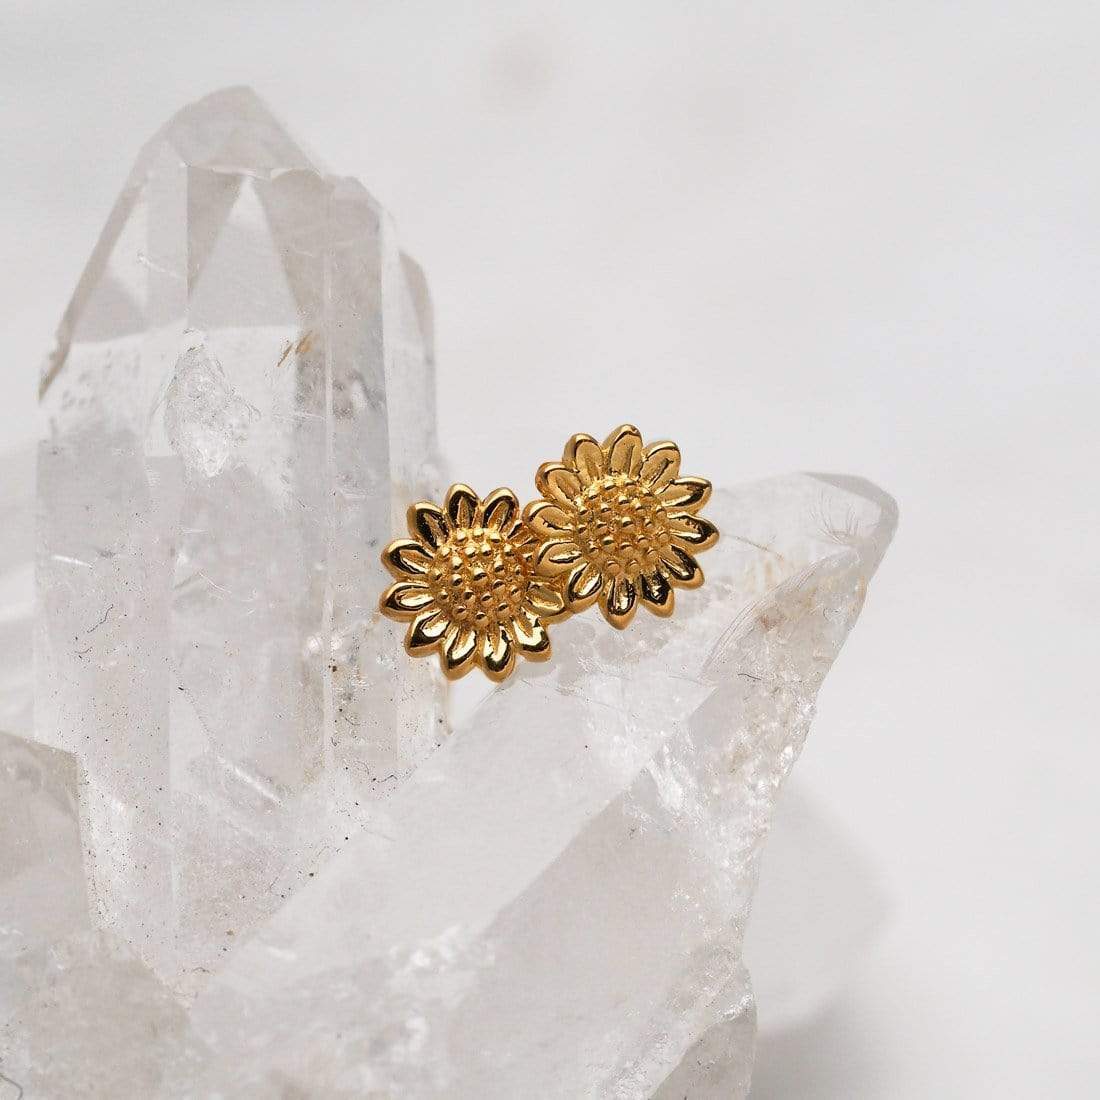 Delicate Sunflower Studs Gold